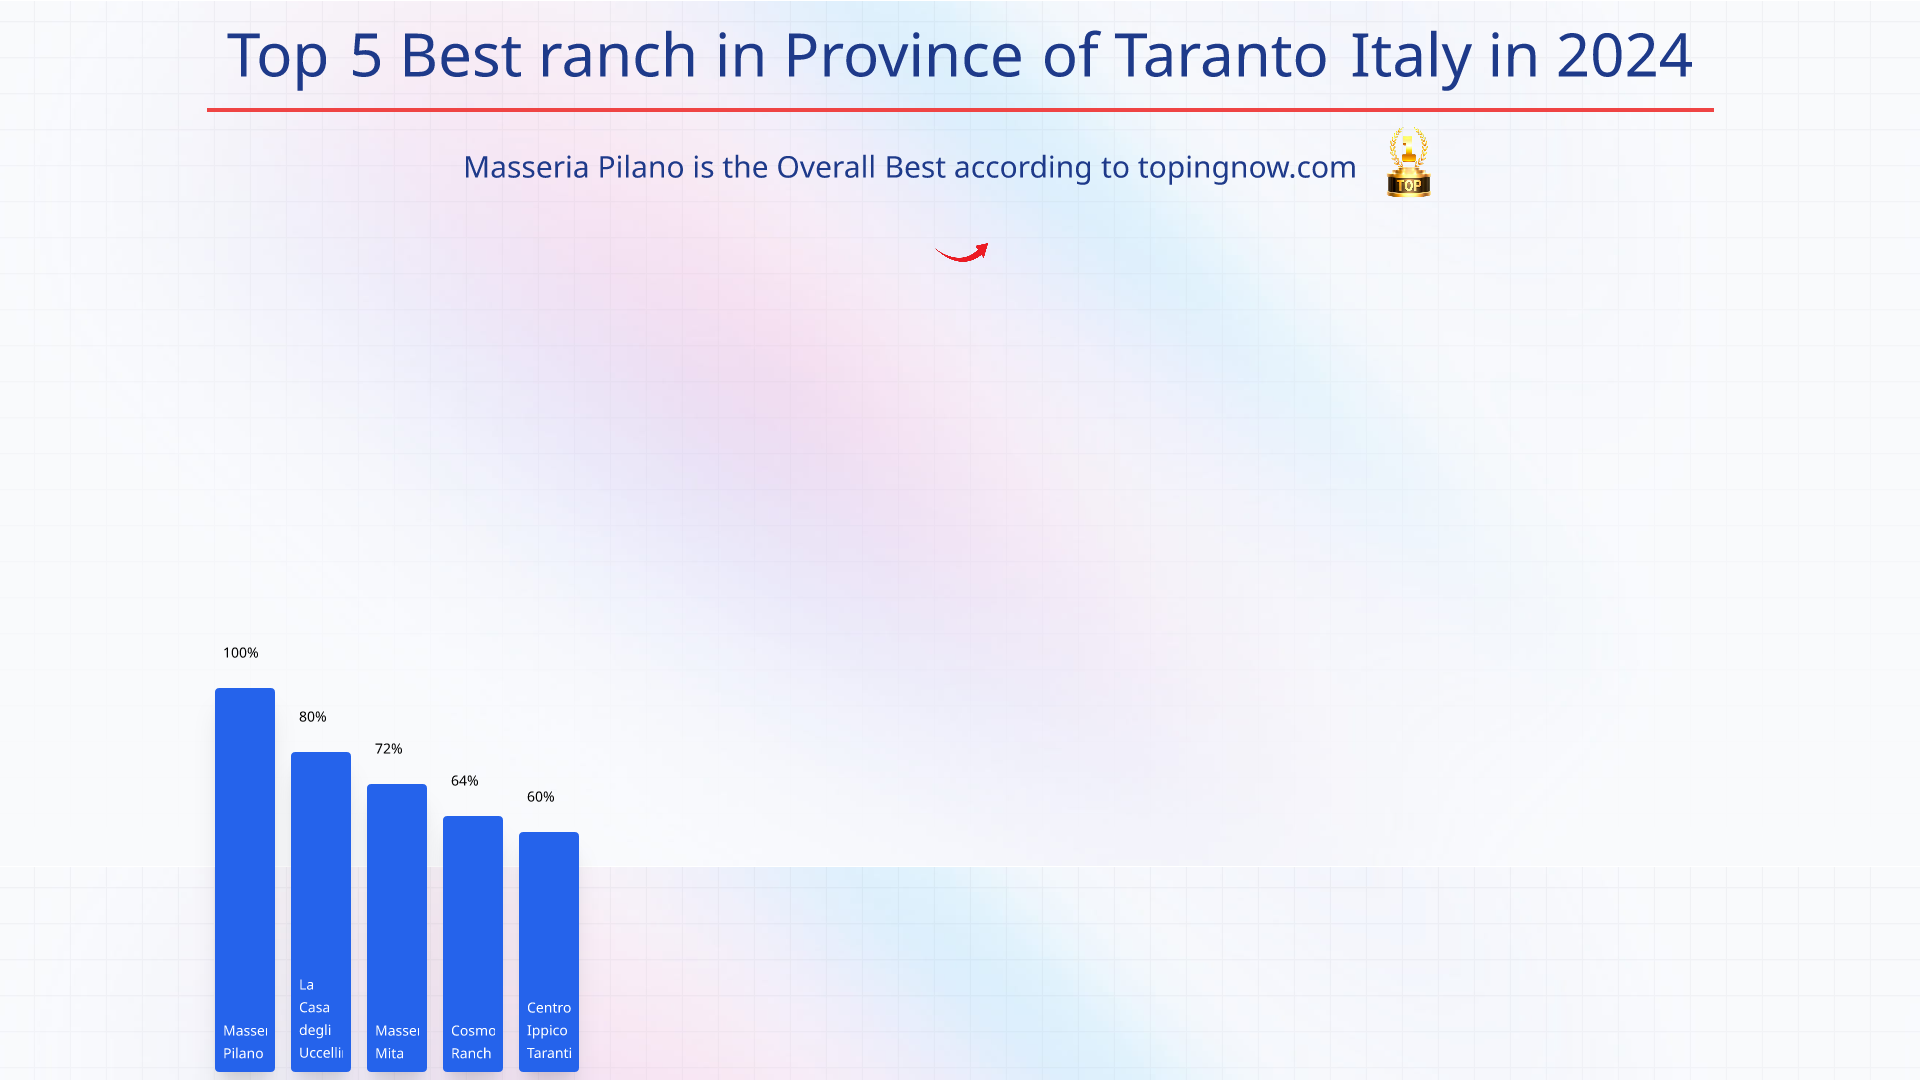 Top 5 Best ranch in Province of Taranto Italy in 2024: Top 5 Best ranch in Province of Taranto Italy in 2024